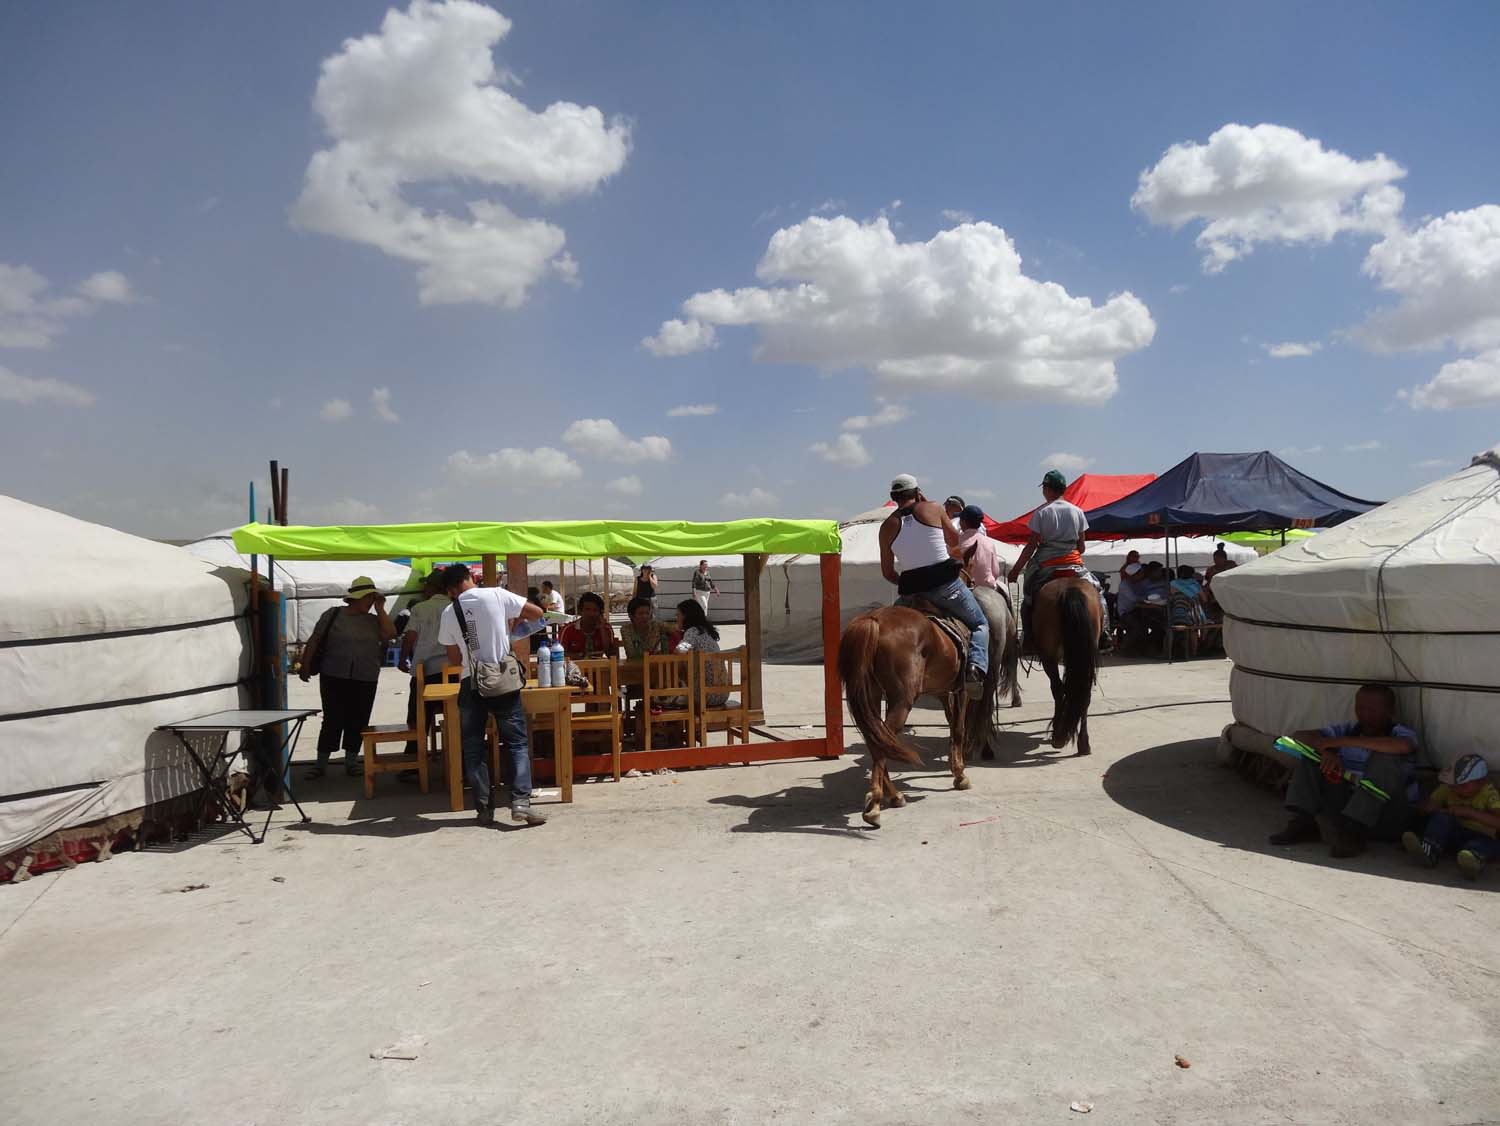 restaurants set up in the ger camp at the races, many families spend a few days or longer here